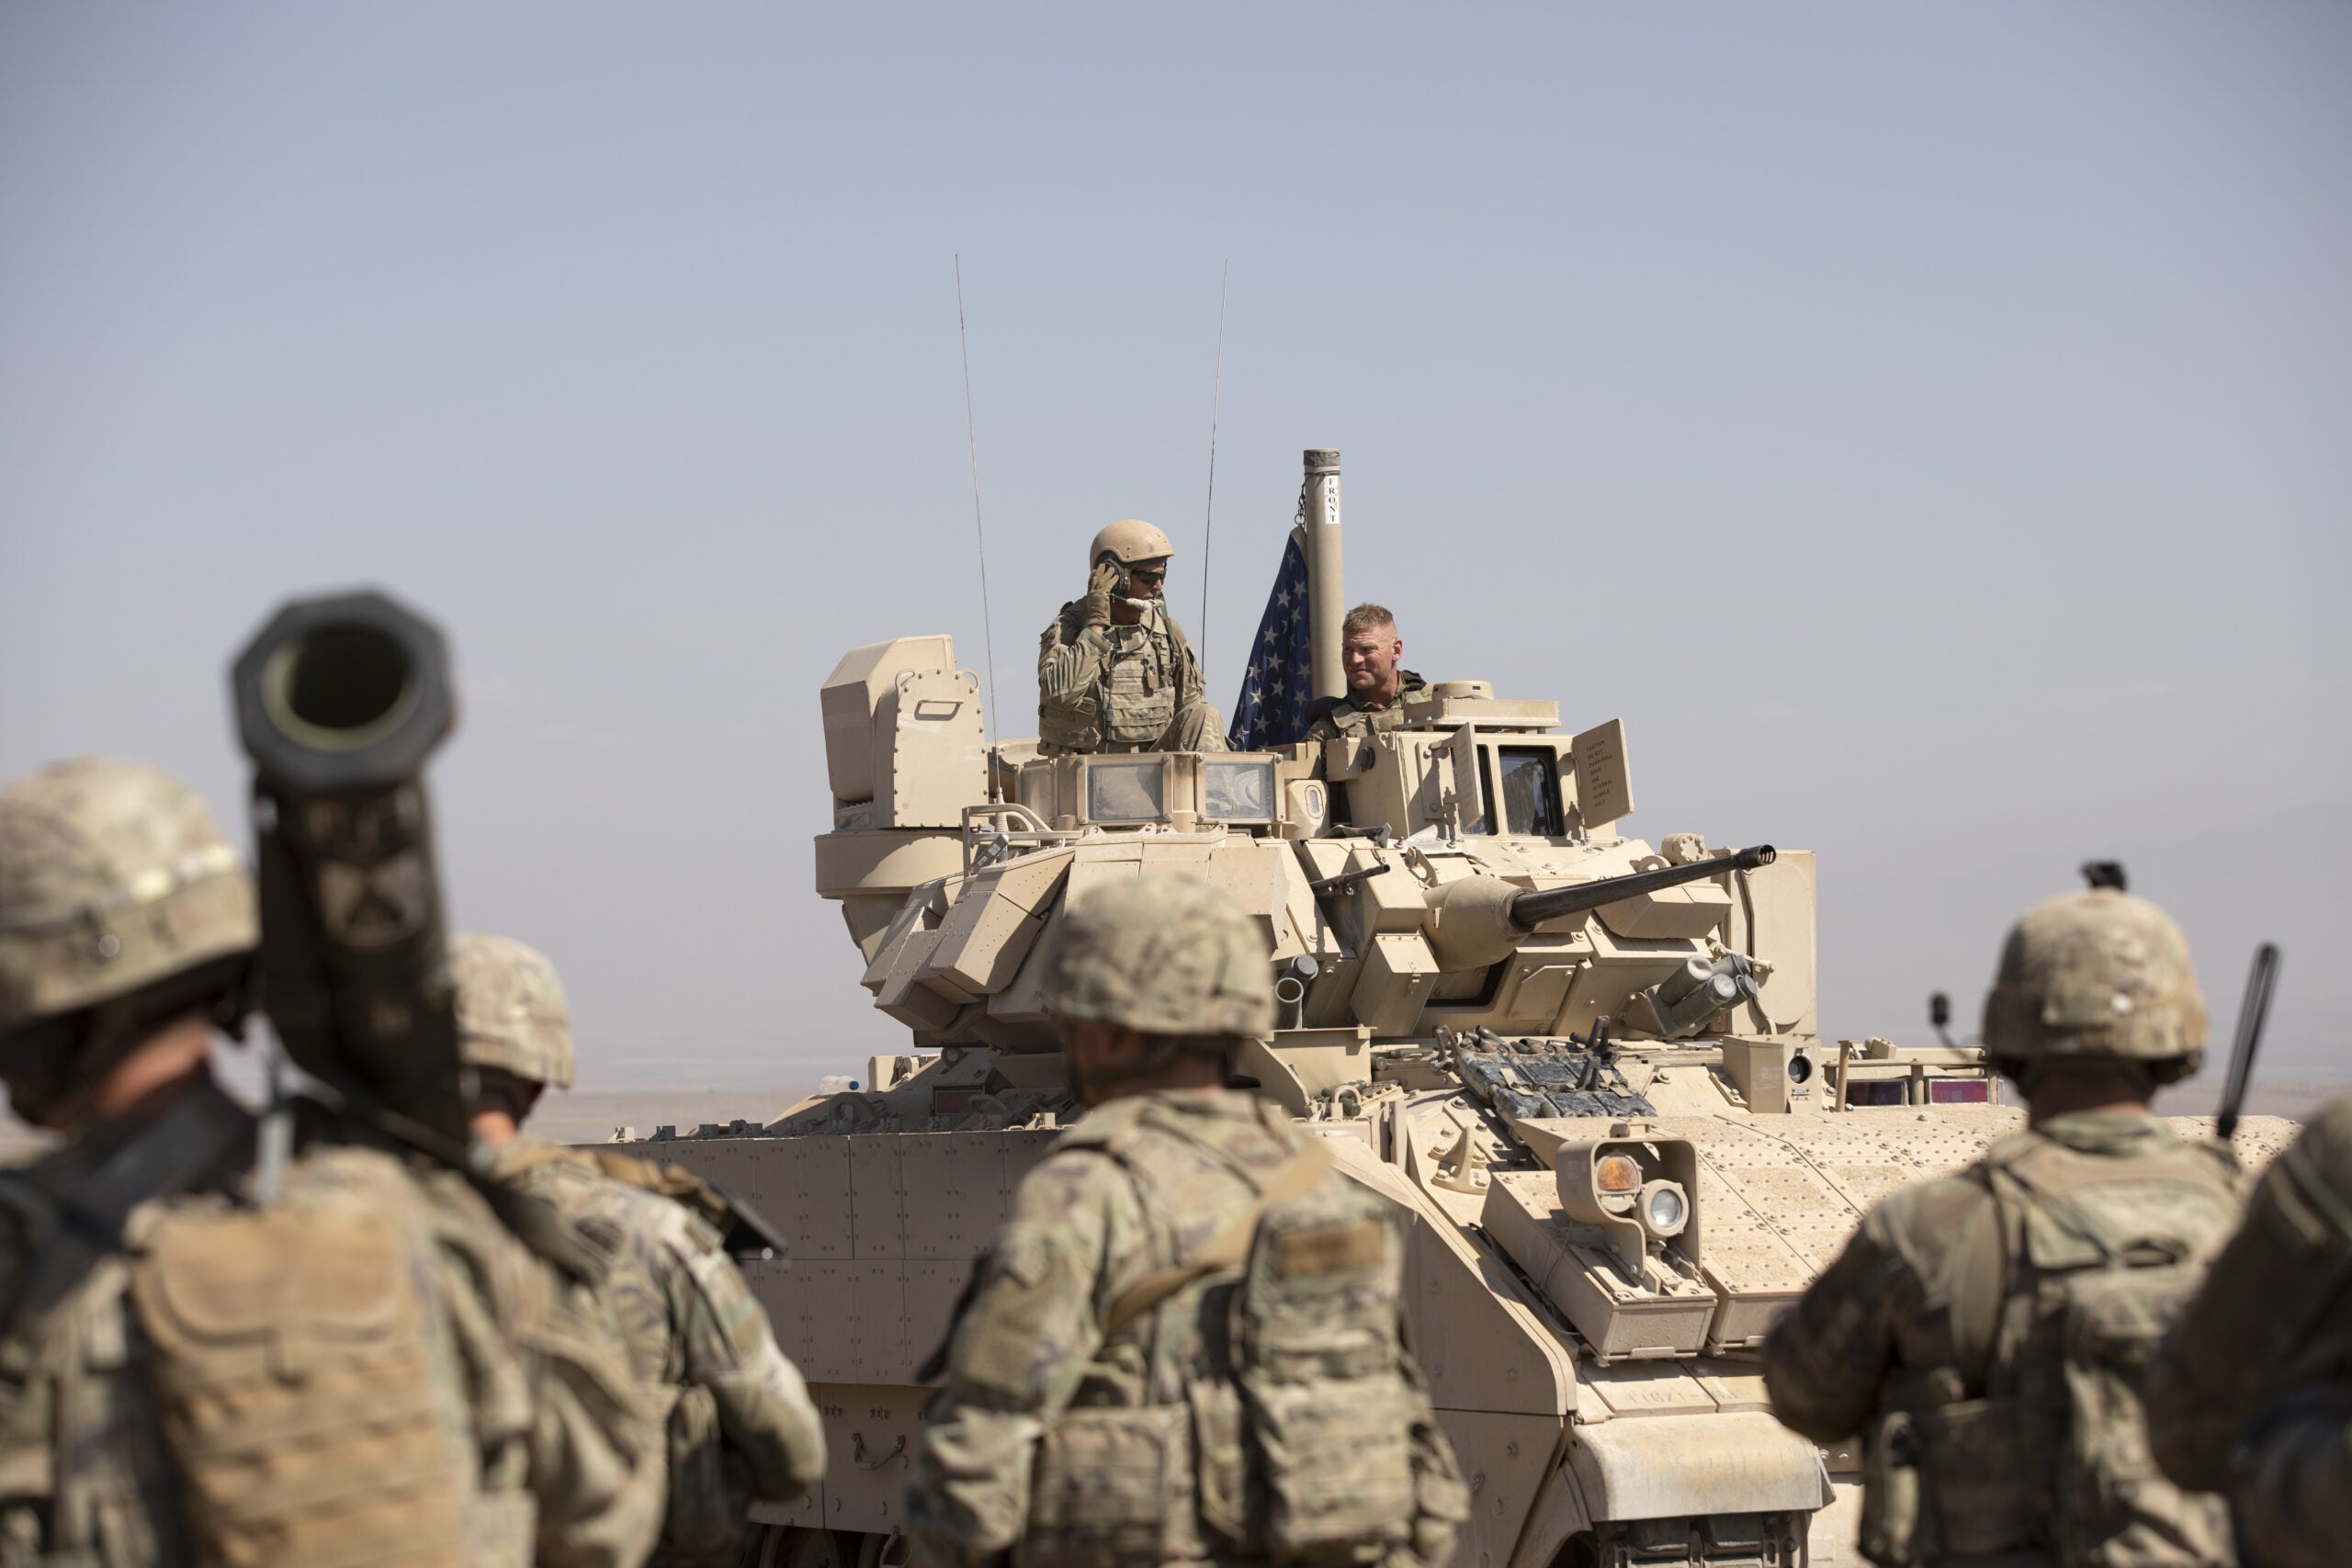 Why the US still has not defeated ISIS in Iraq and Syria, according to a new report